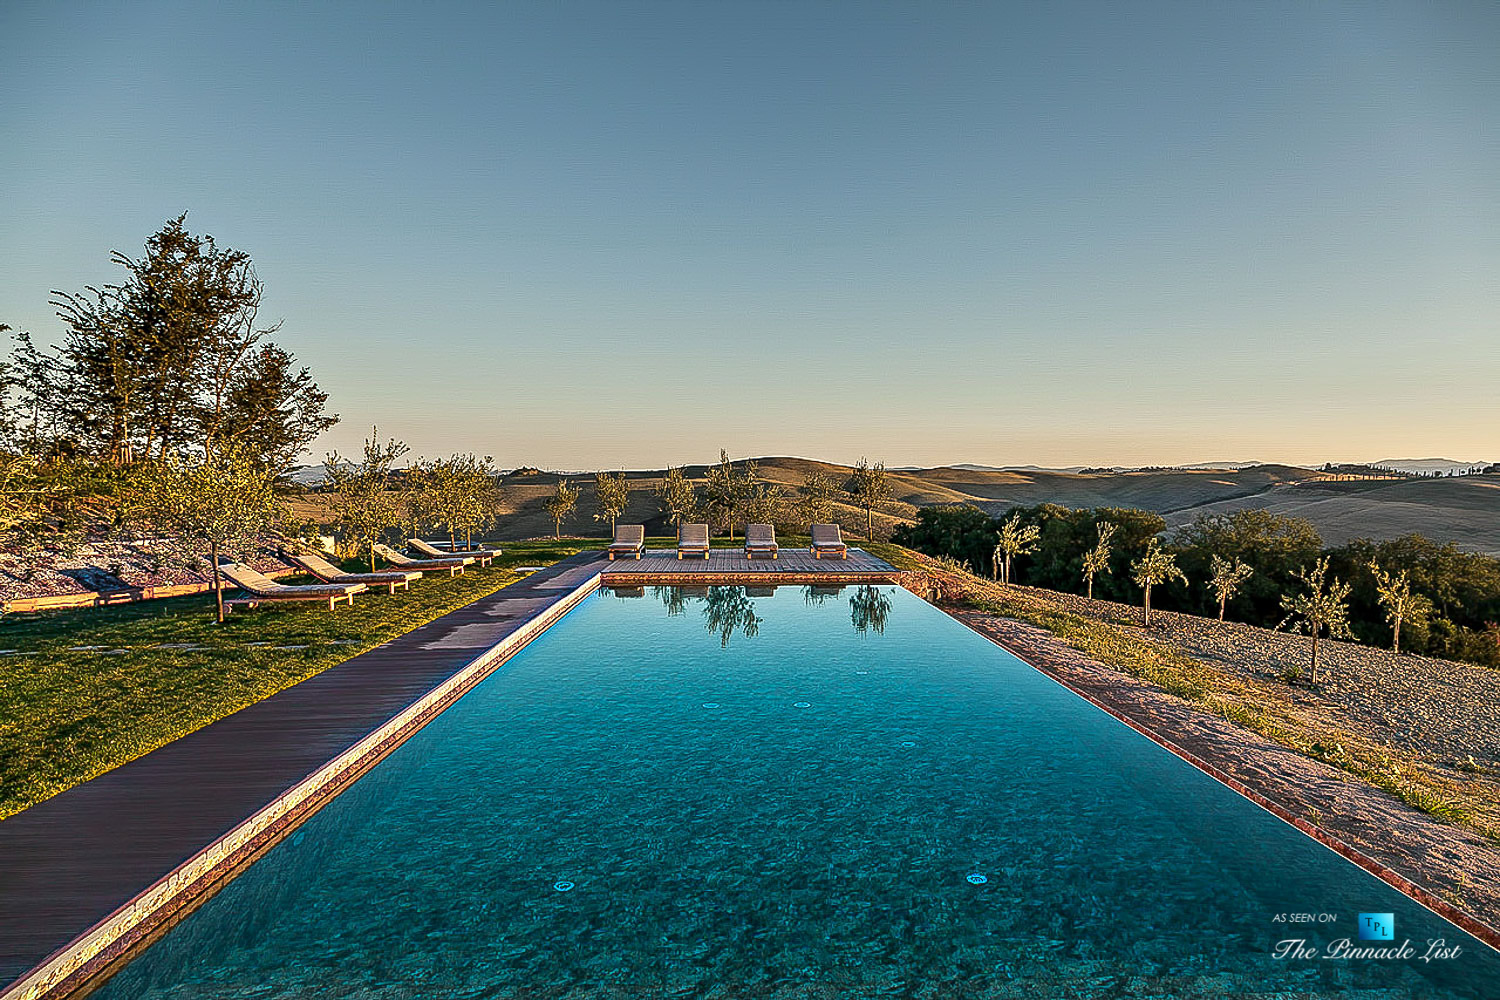 Podere Paníco Estate - Monteroni d'Arbia, Tuscany, Italy - Property Outdoor Pool and Deck View - Luxury Real Estate - Tuscan Villa